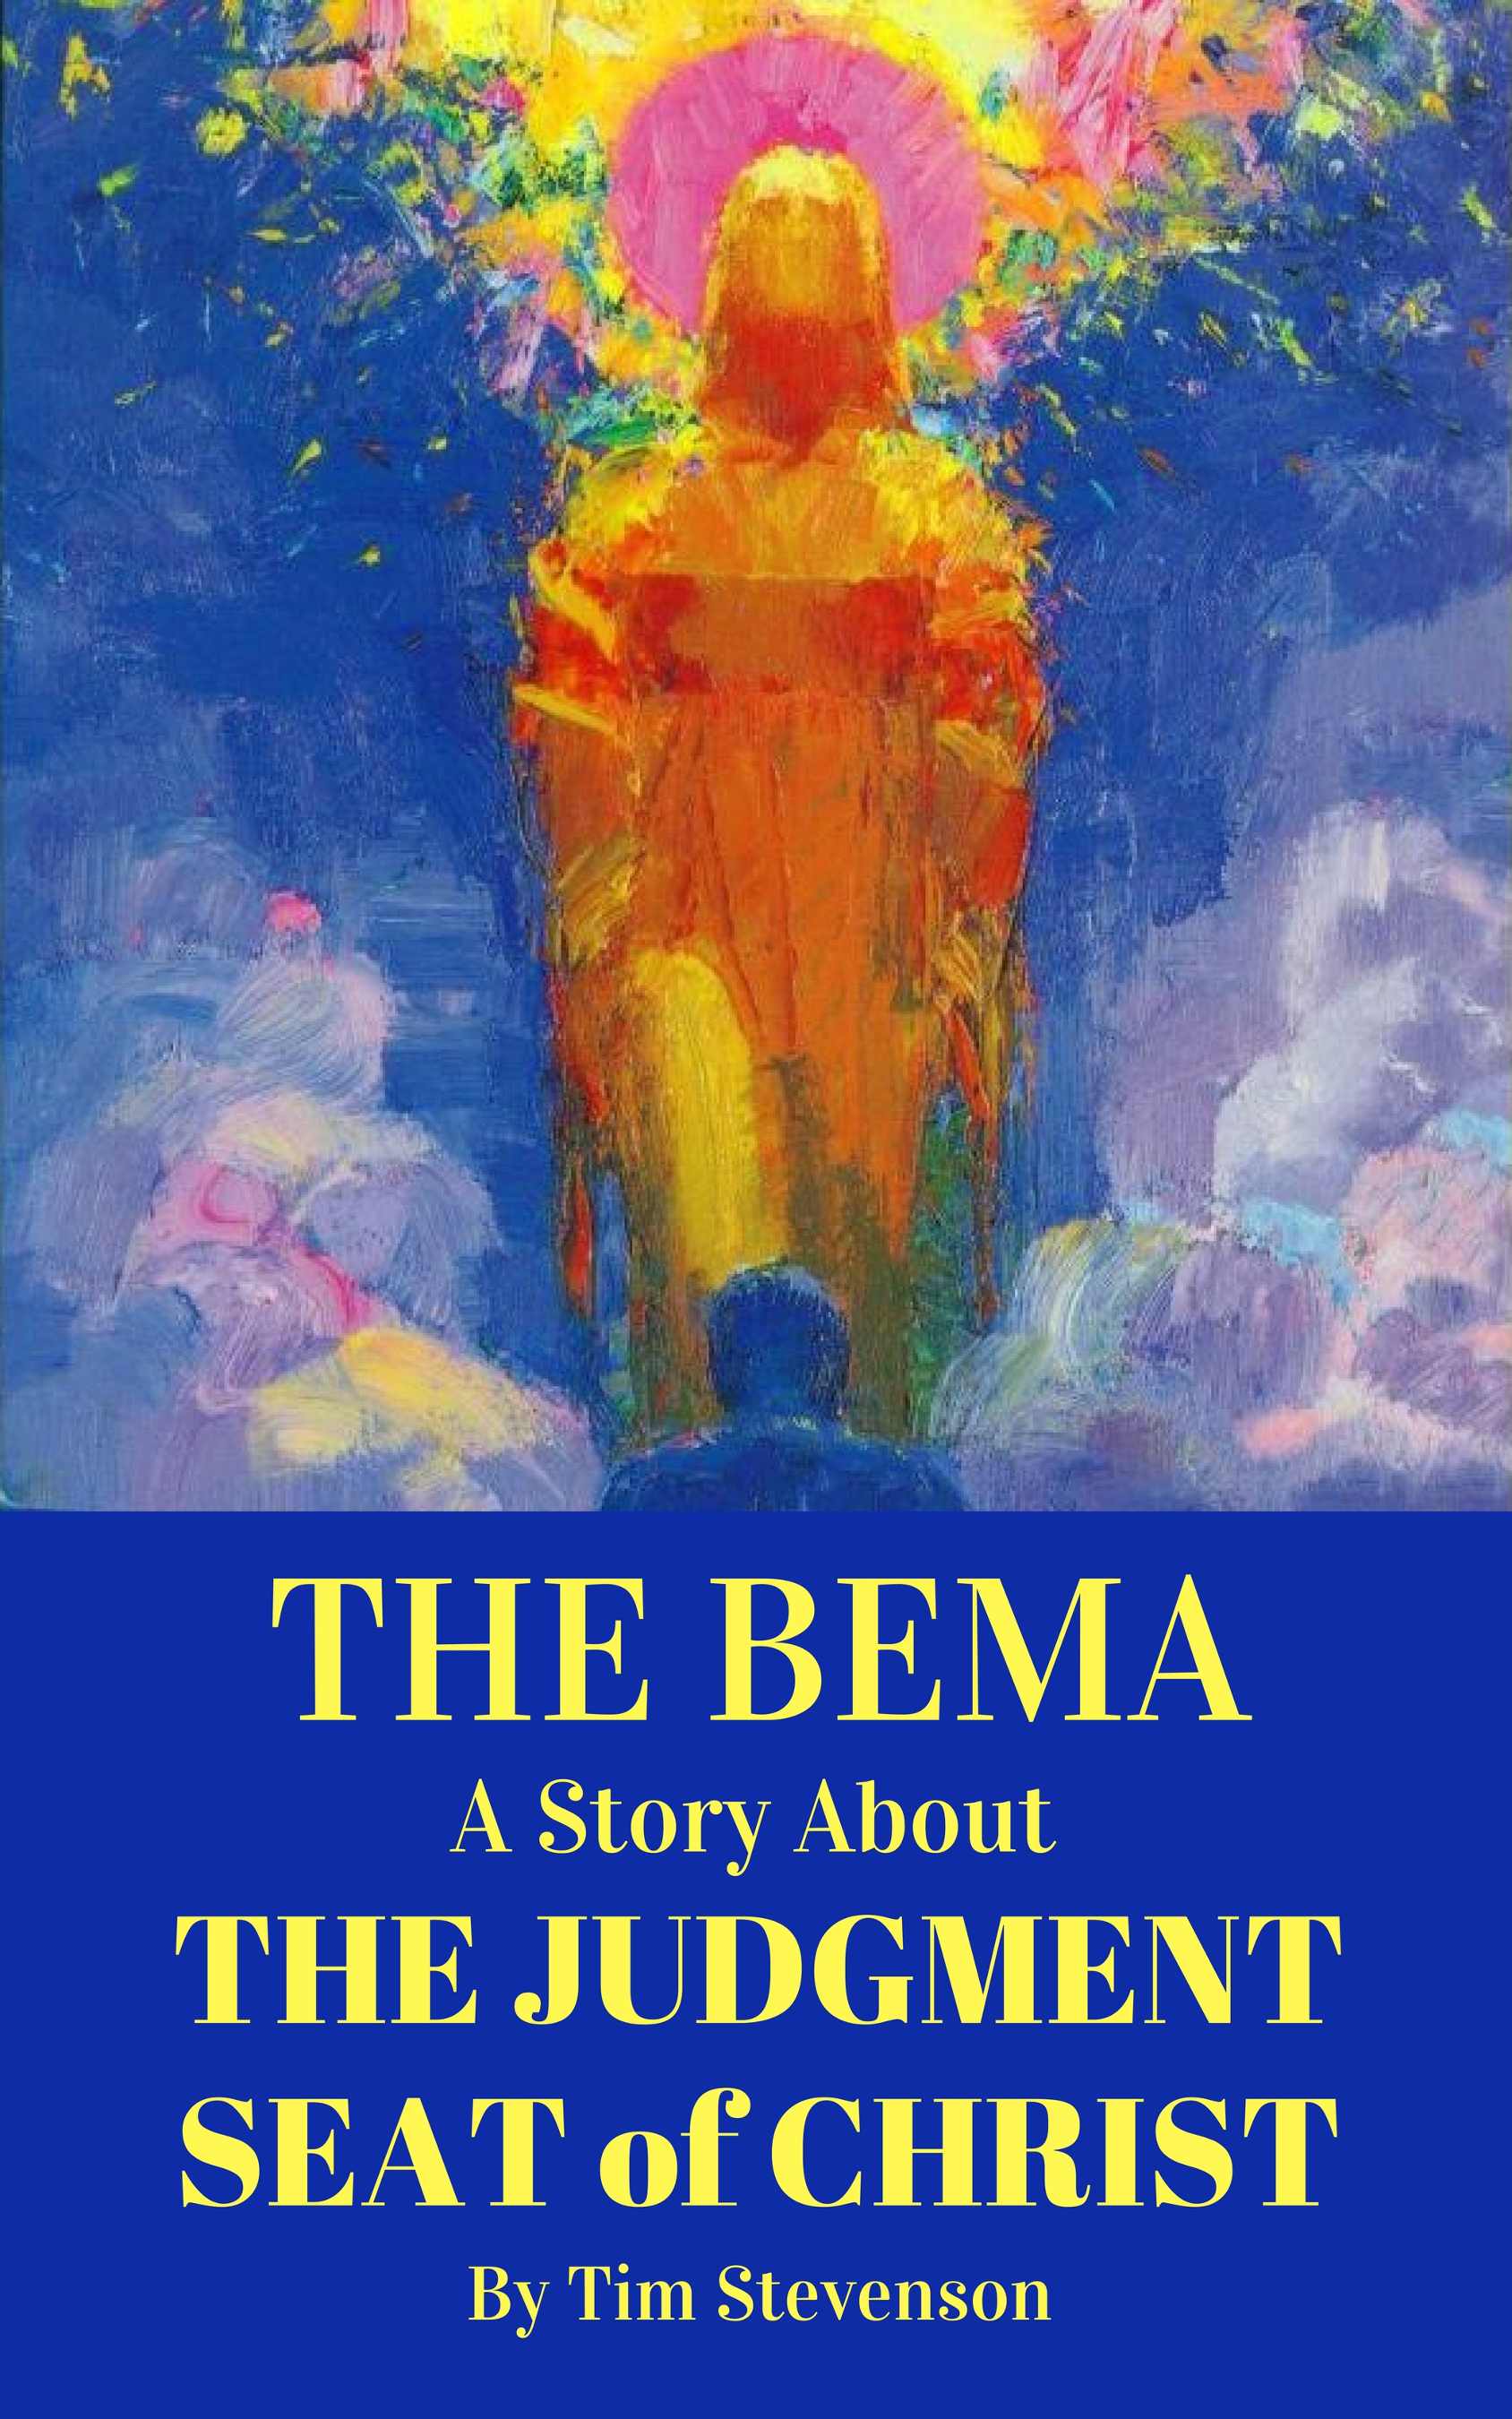 FREE: The Bema: A Story about the Judgment Seat of Christ by Tim Stevenson